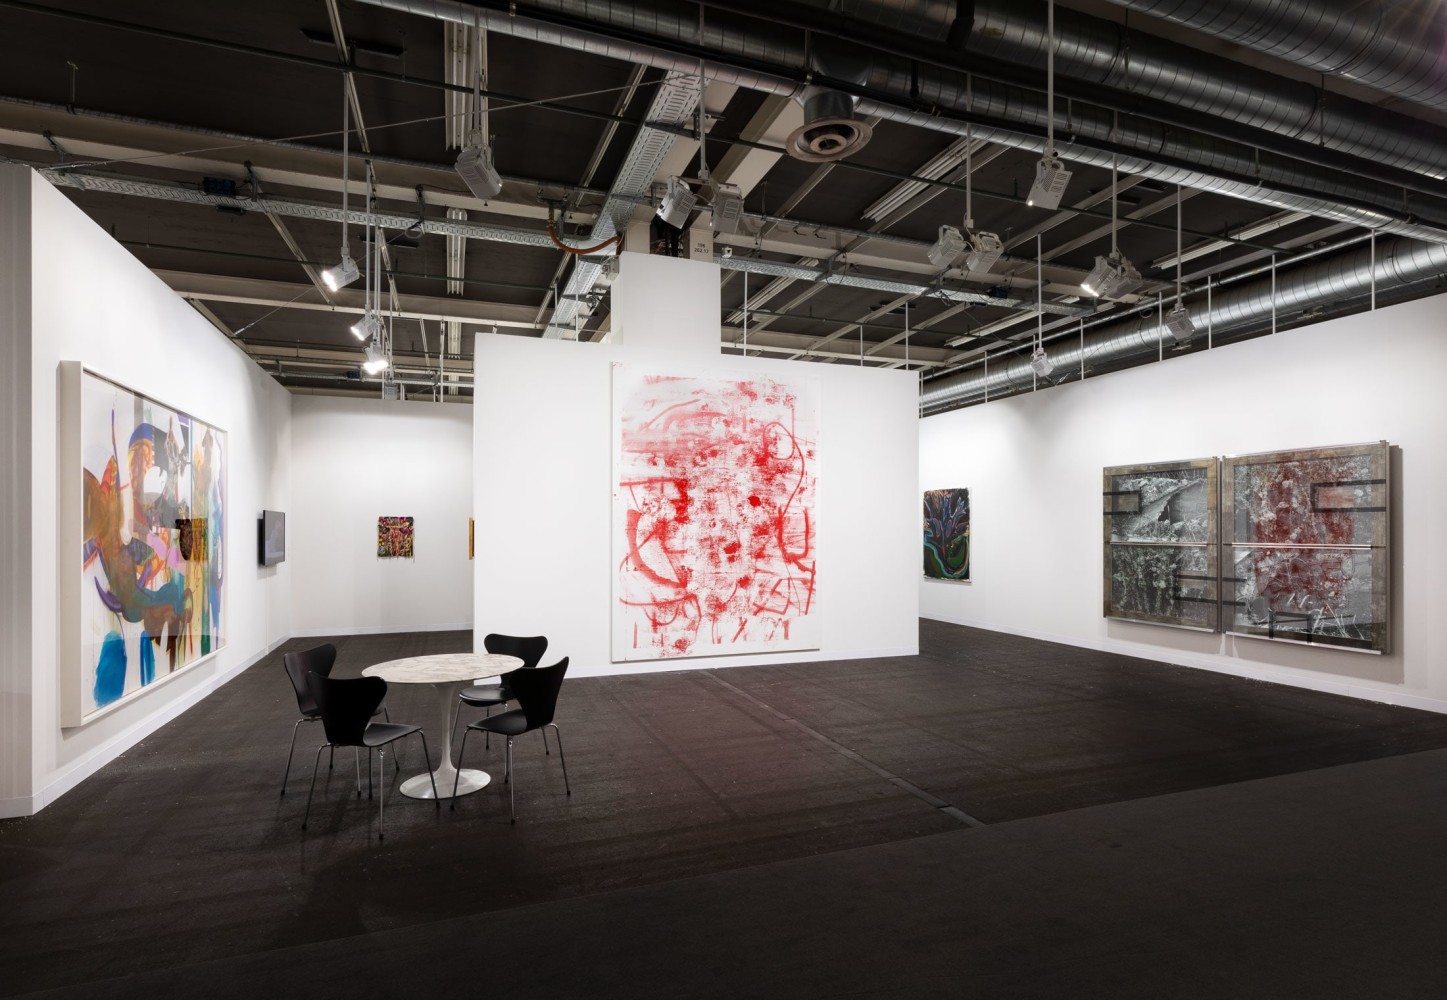 Luhring Augustine

Art Basel, Booth A3

Installation view

2019

Pictured from left: Albert Oehlen, Simone Leigh, Christina Forrer, Christopher Wool, Josh Smith, Reinhard Mucha